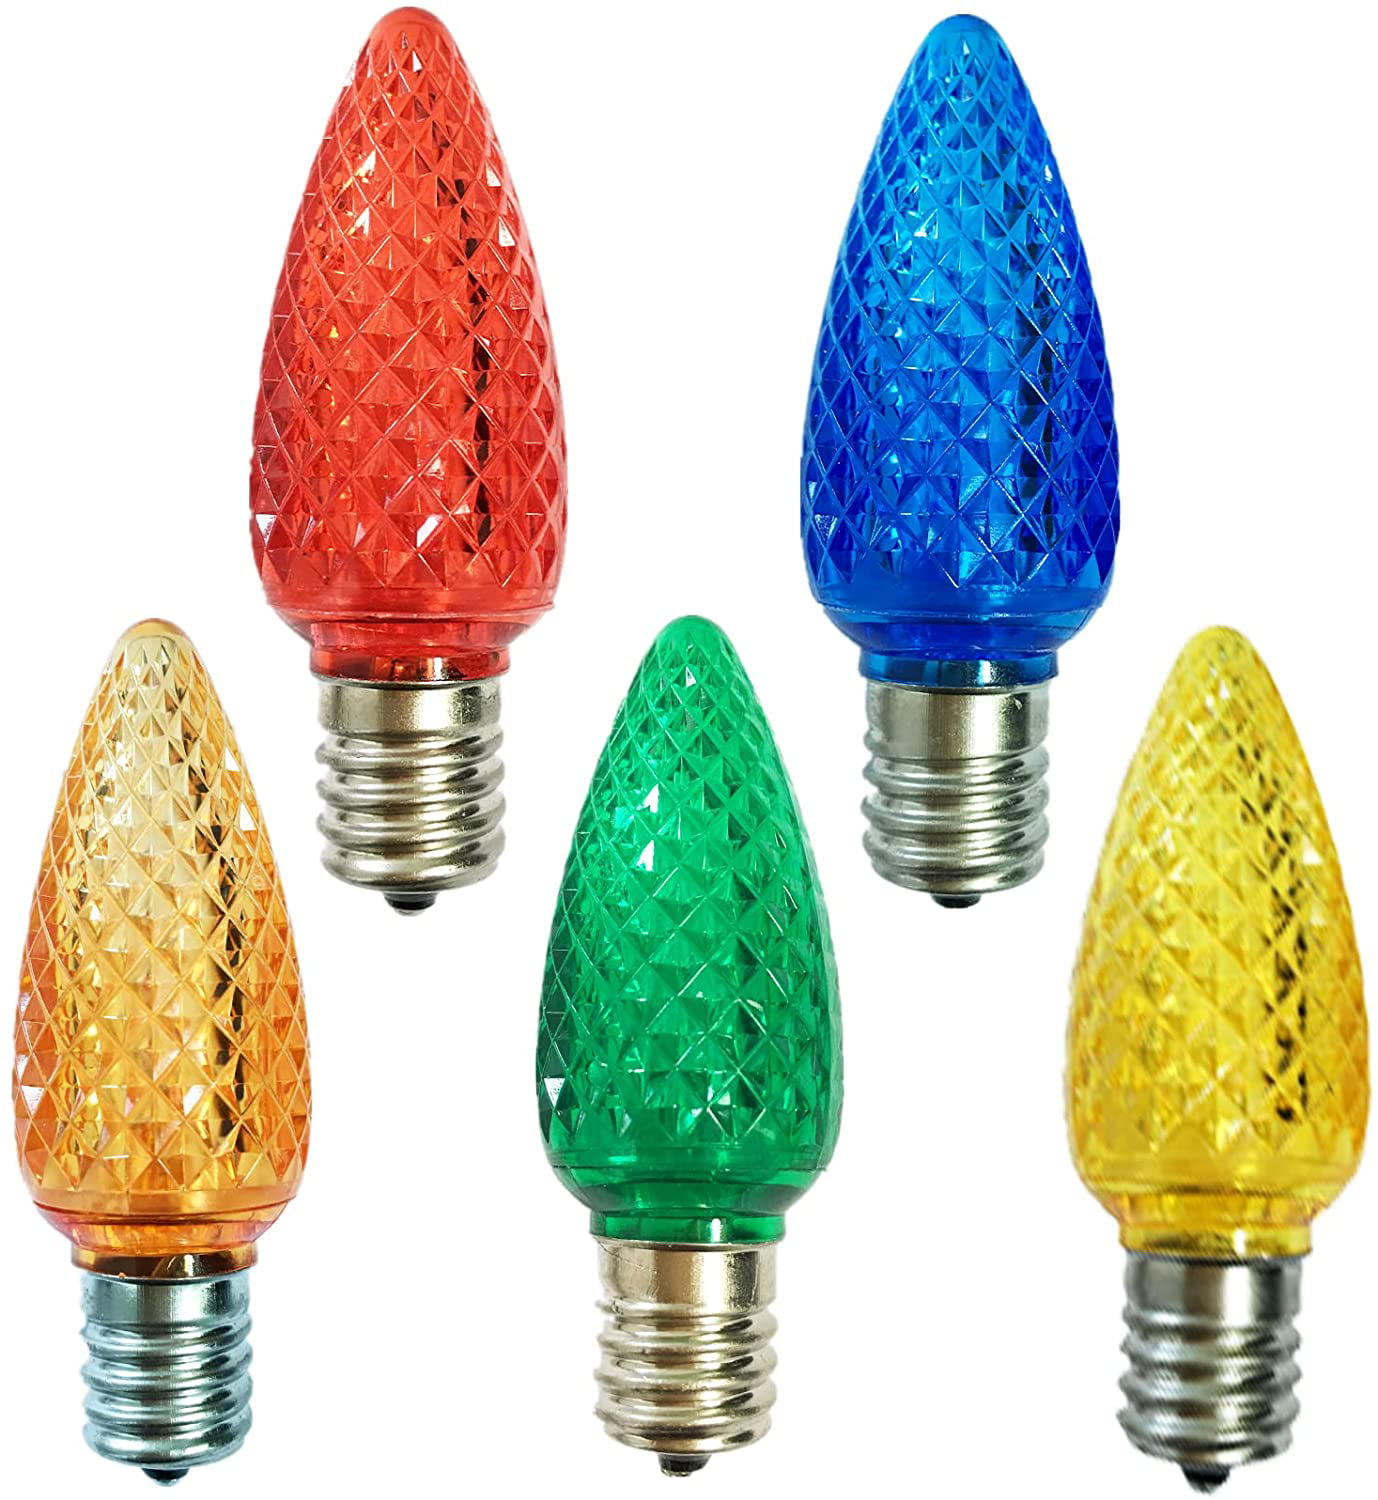 CSA Listed 25 Pack C9 Led Replacement Bulb,SMD Led C9 Facted Bulb,Multi Color 